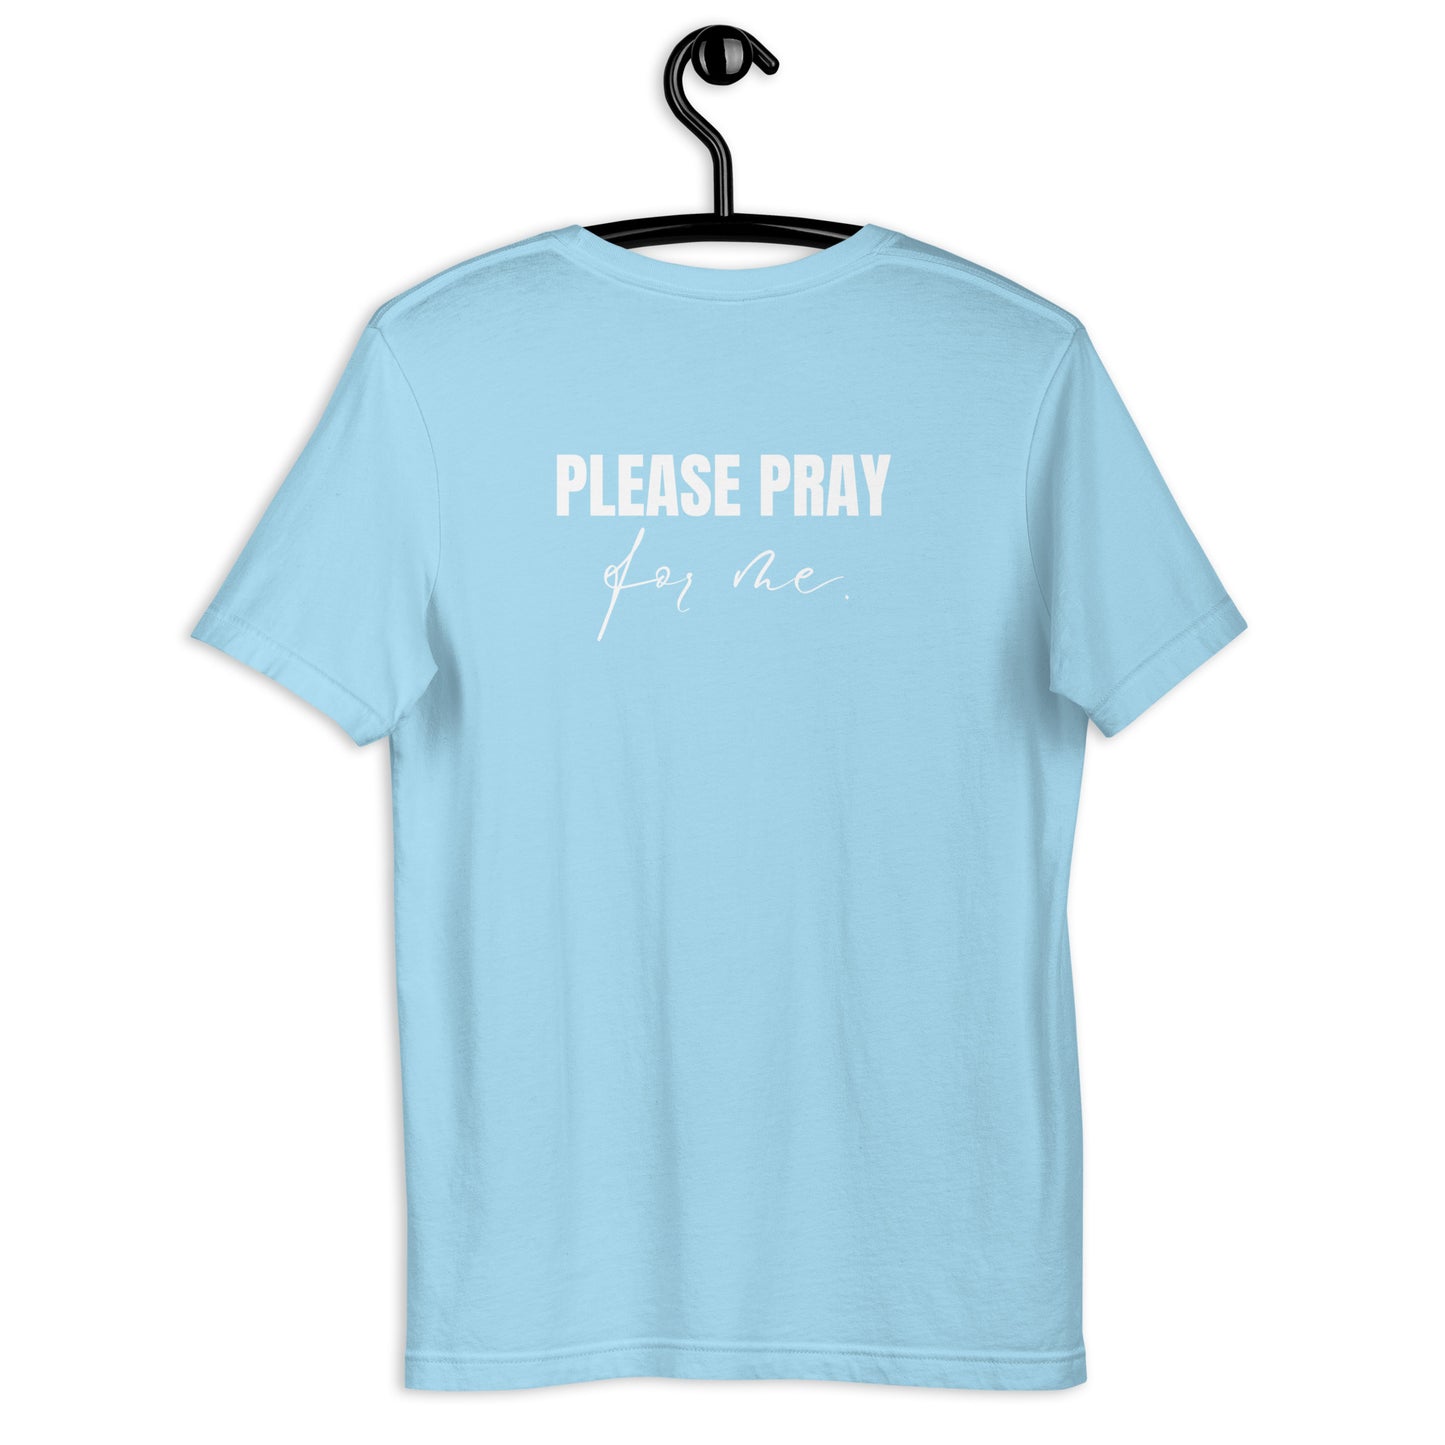 Praying for you - in color - Unisex t-shirt